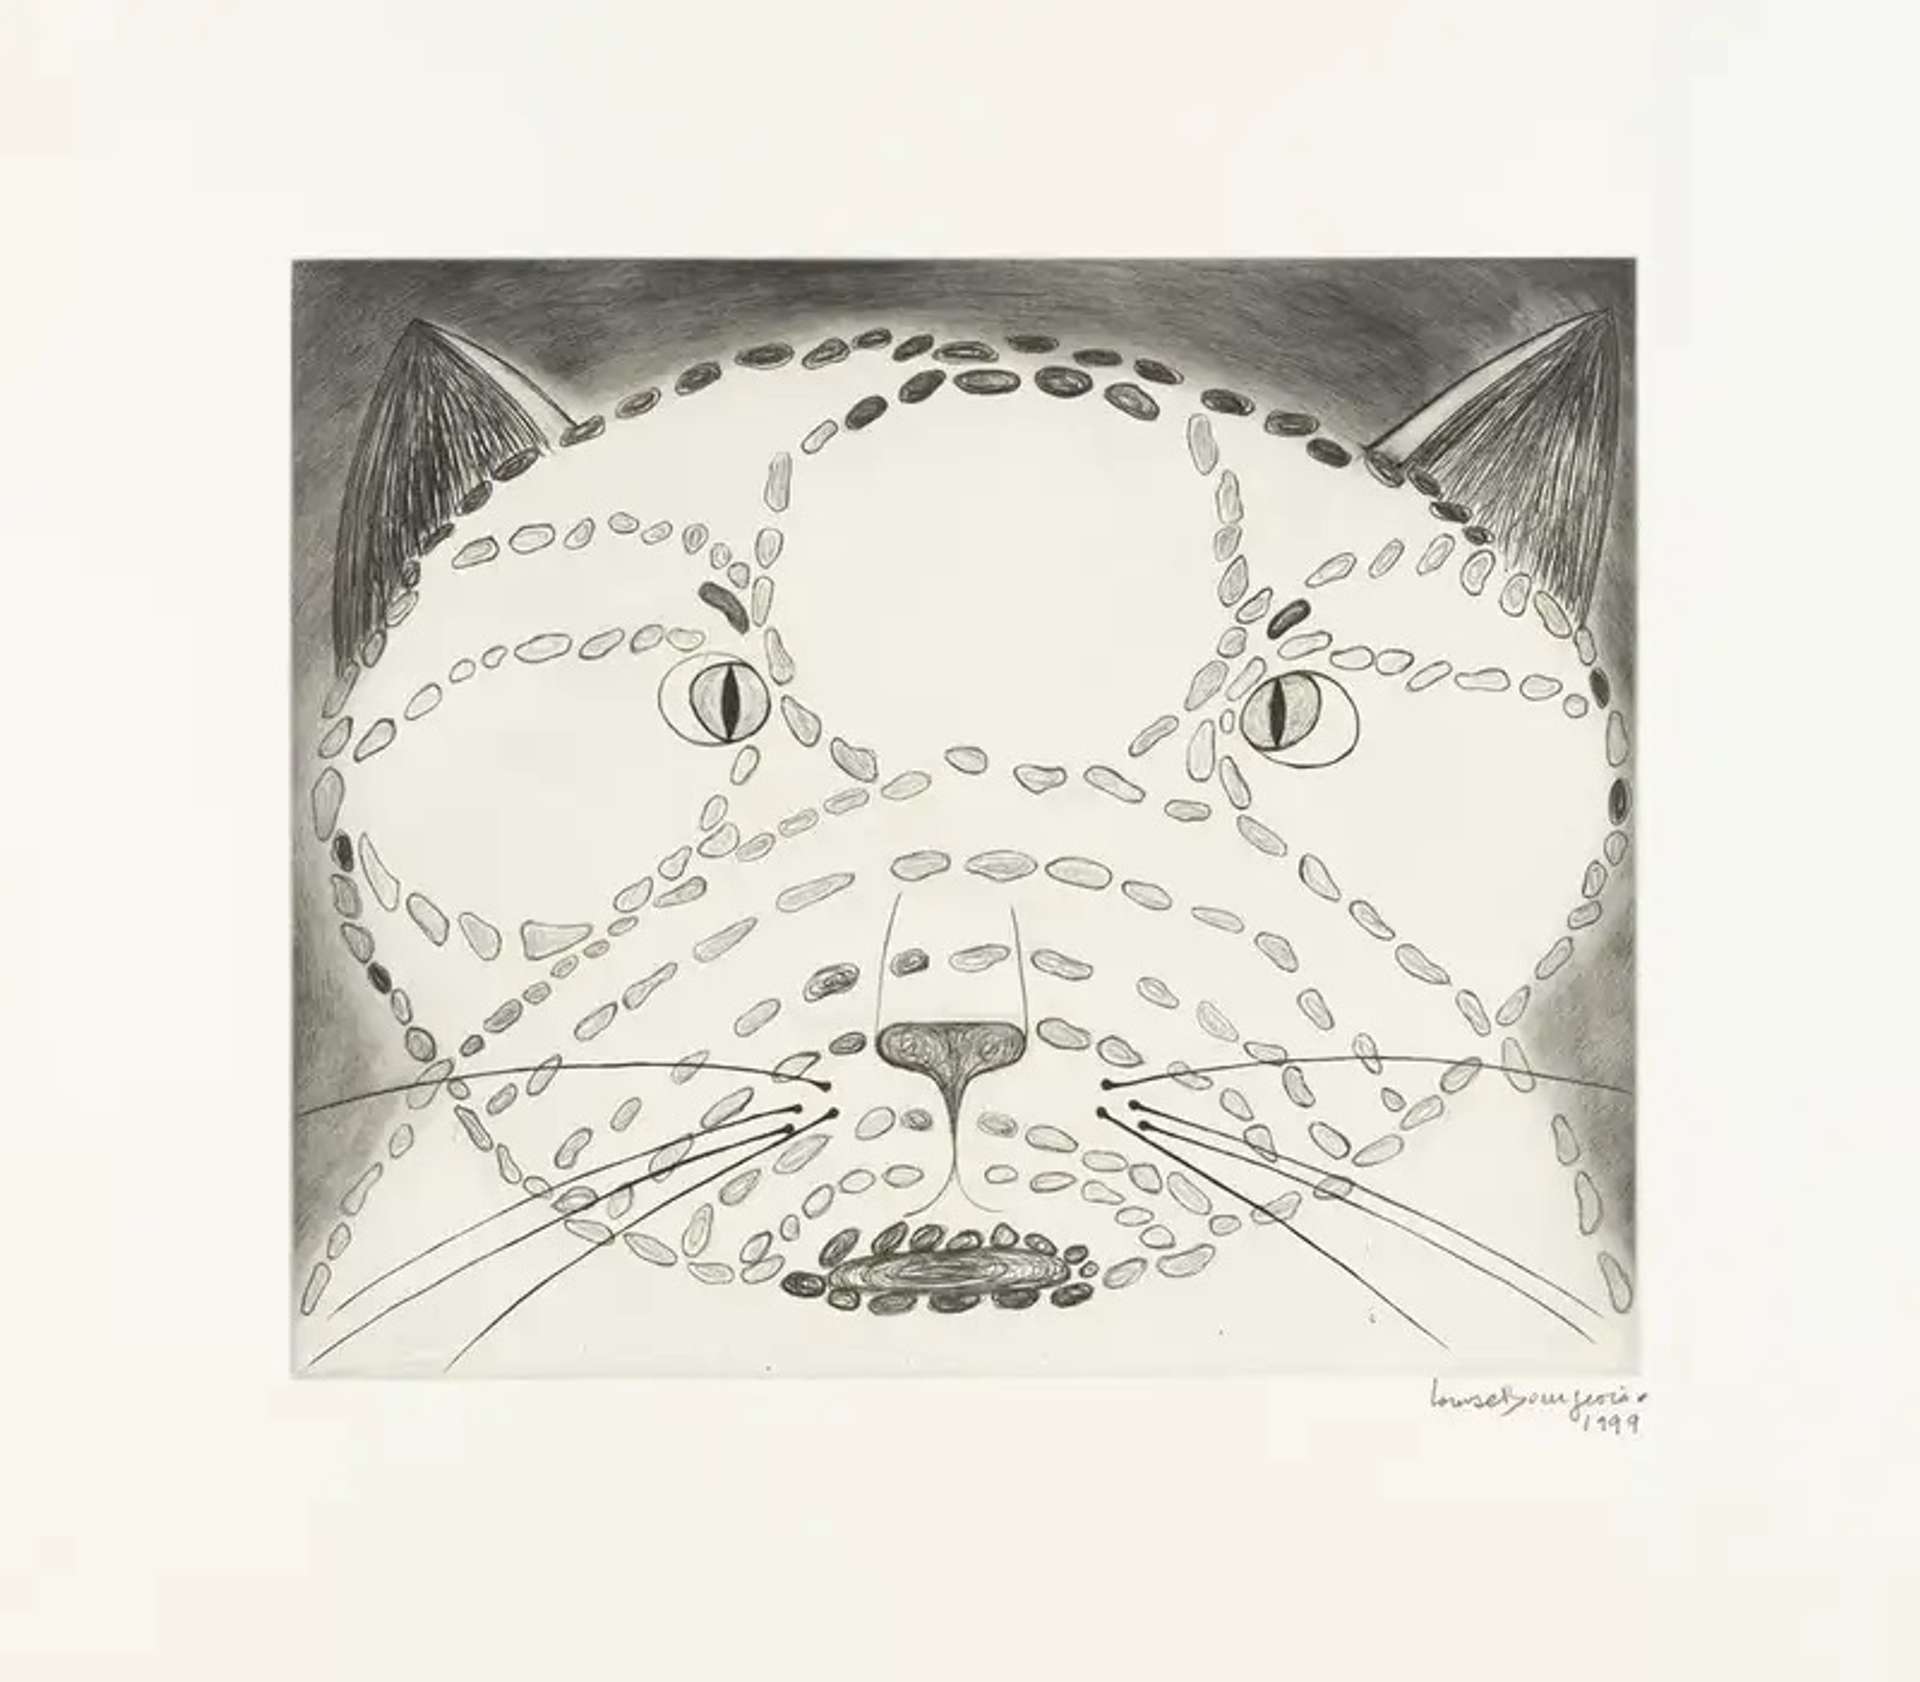 Louise Bourgeois’ The Angry Cat. A drypoint print of a cat’s face, upclose.